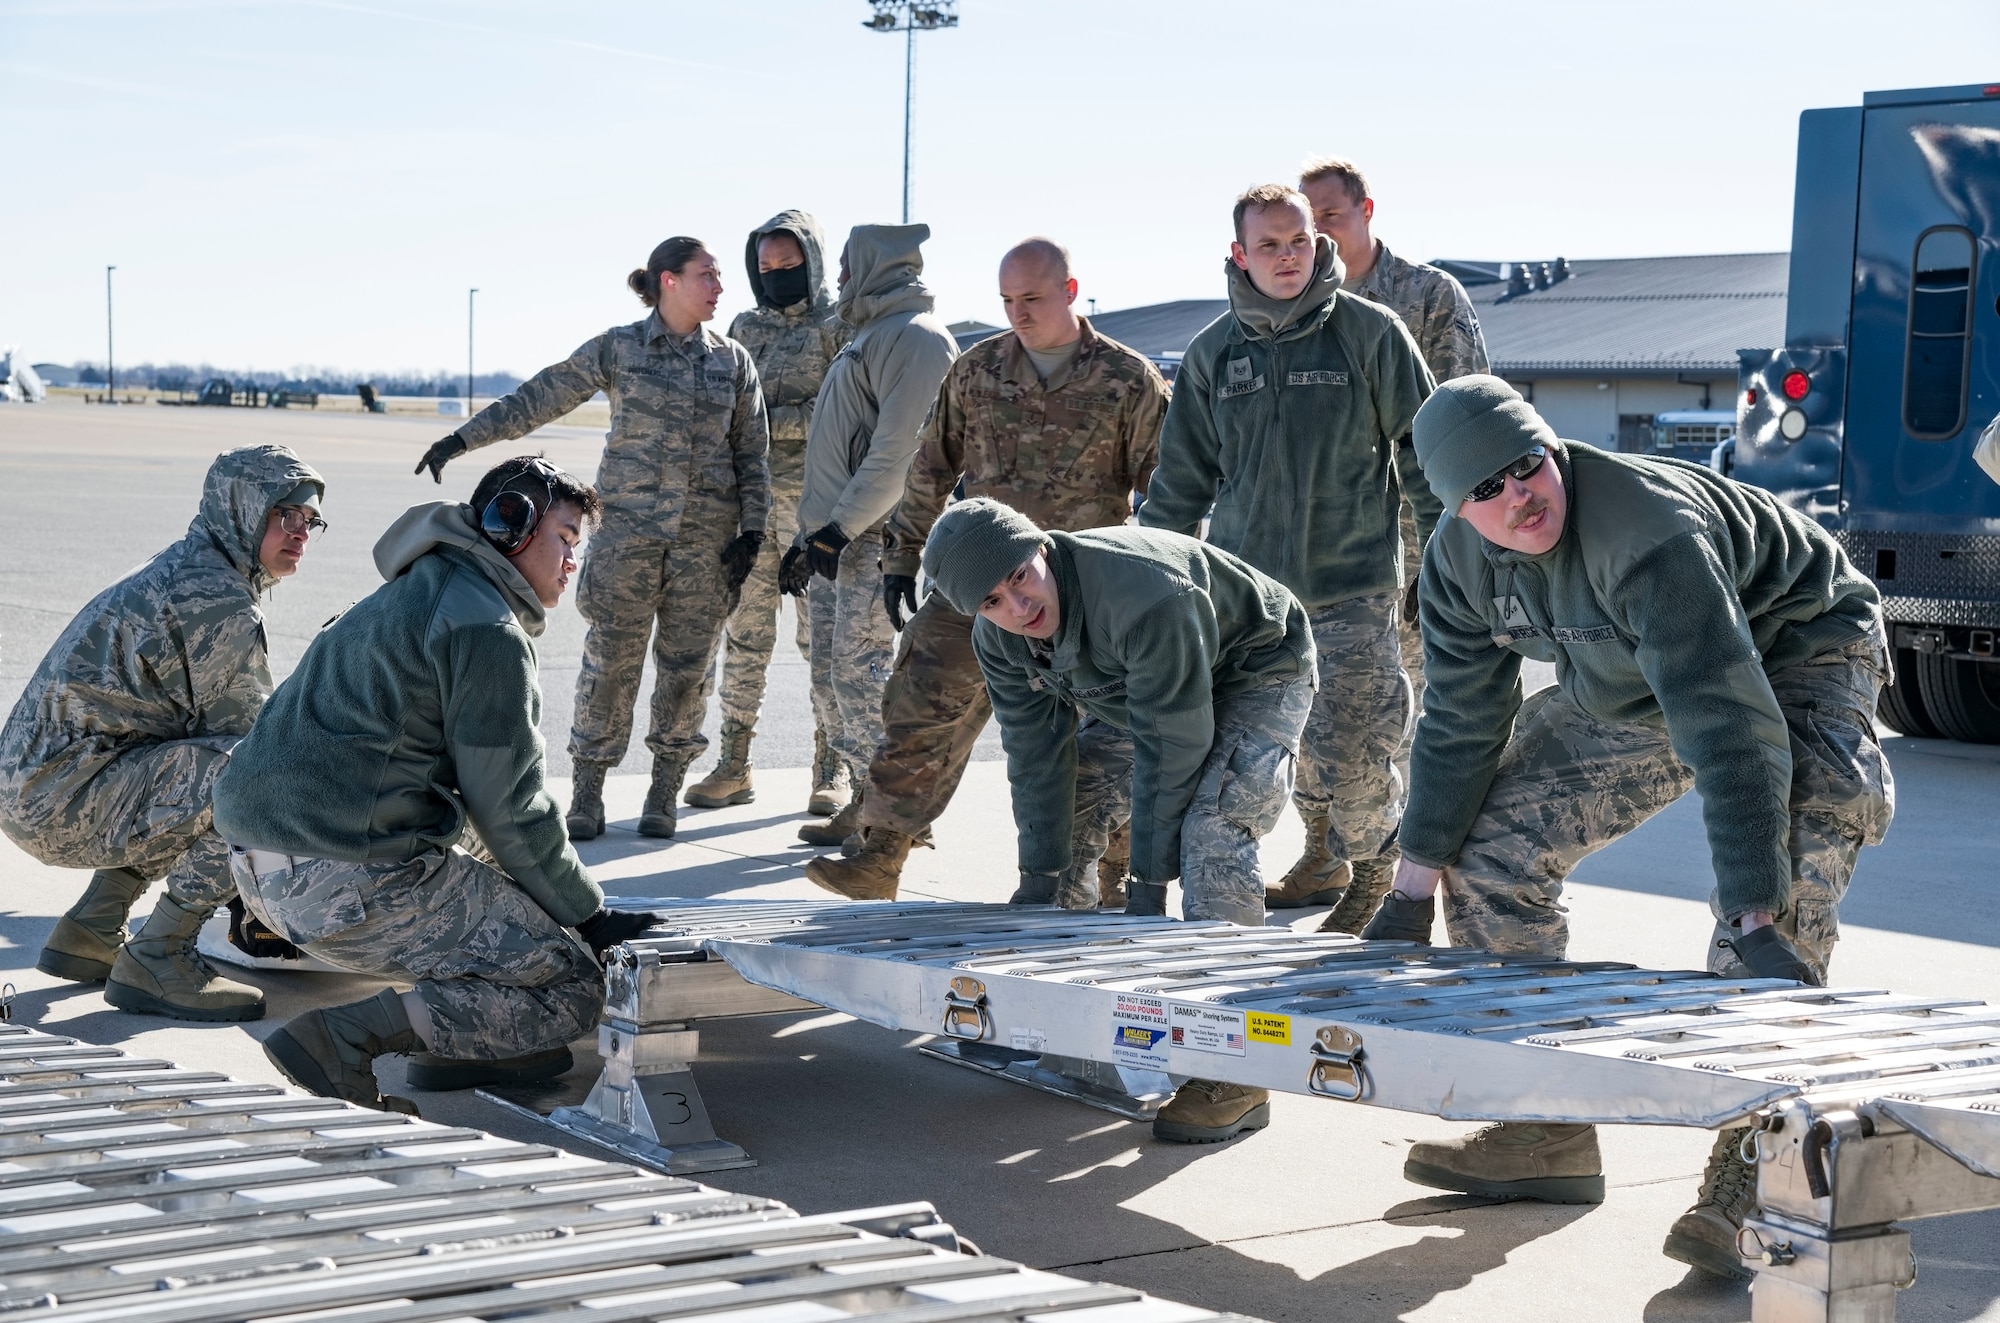 Ramp operations personnel assigned to the 436th Aerial Port Squadron position the DOMOPS Airlift Modular Approach Shoring up to the ramp of a C-17 Globemaster III from the 105th Airlift Wing, Stewart Air National Guard Base, Newburgh, N.Y., Jan. 11, 2019, at Dover Air Force Base, Del. The modular shoring was used to upload five vehicles belonging to the Delaware National Guard's 31st Civil Support Team, Weapons of Mass Destruction headquartered in Smyrna, Del. (U.S. Air Force photo by Roland Balik)